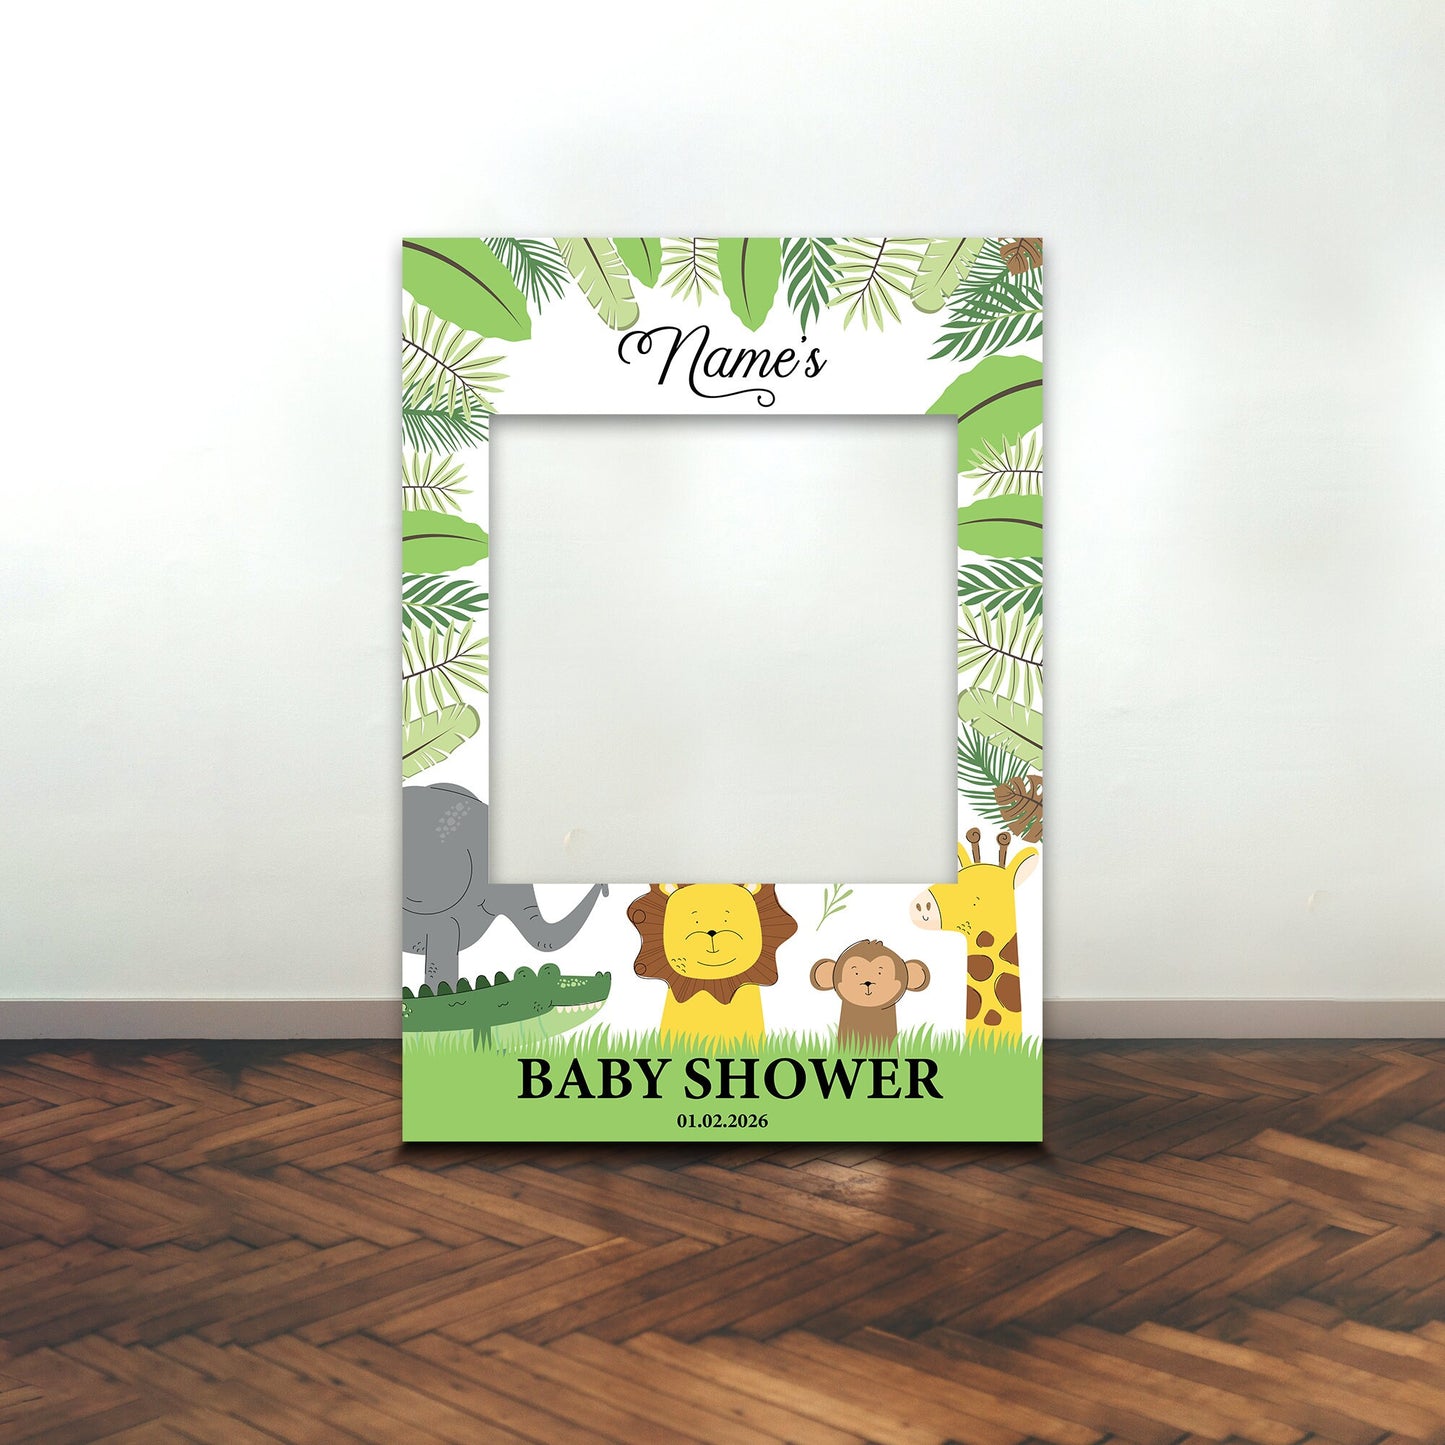 BABY SHOWER FRAME Personalised Mummy To Be Selfie Animal Safari Frame Prop Party Baby Boy Baby Girl Celebrations Decoration Party Supplies